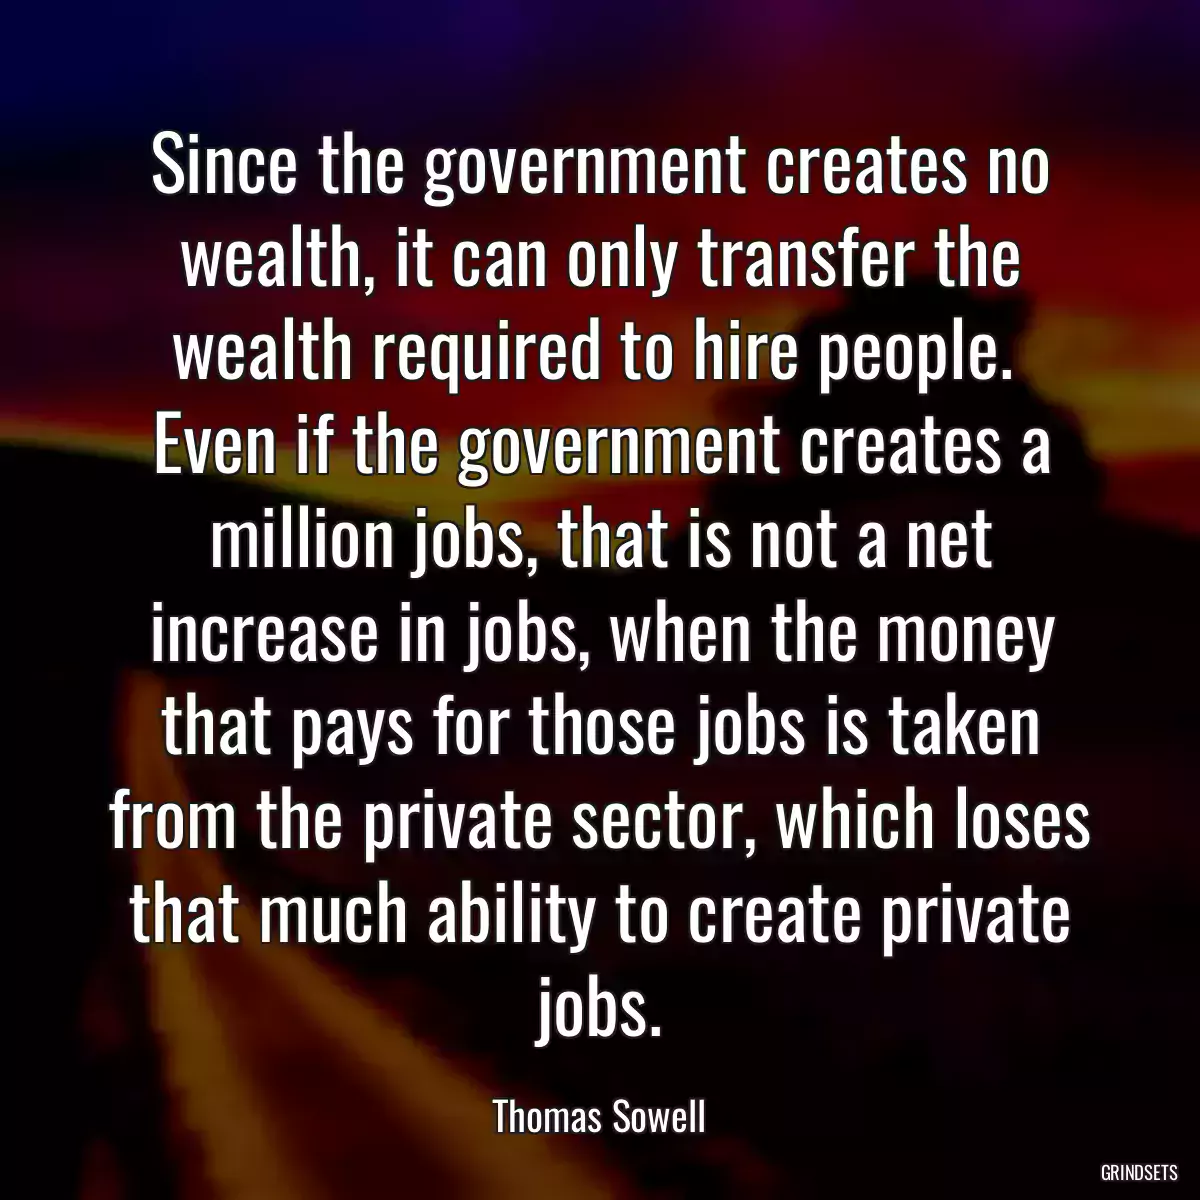 Since the government creates no wealth, it can only transfer the wealth required to hire people.  Even if the government creates a million jobs, that is not a net increase in jobs, when the money that pays for those jobs is taken from the private sector, which loses that much ability to create private jobs.